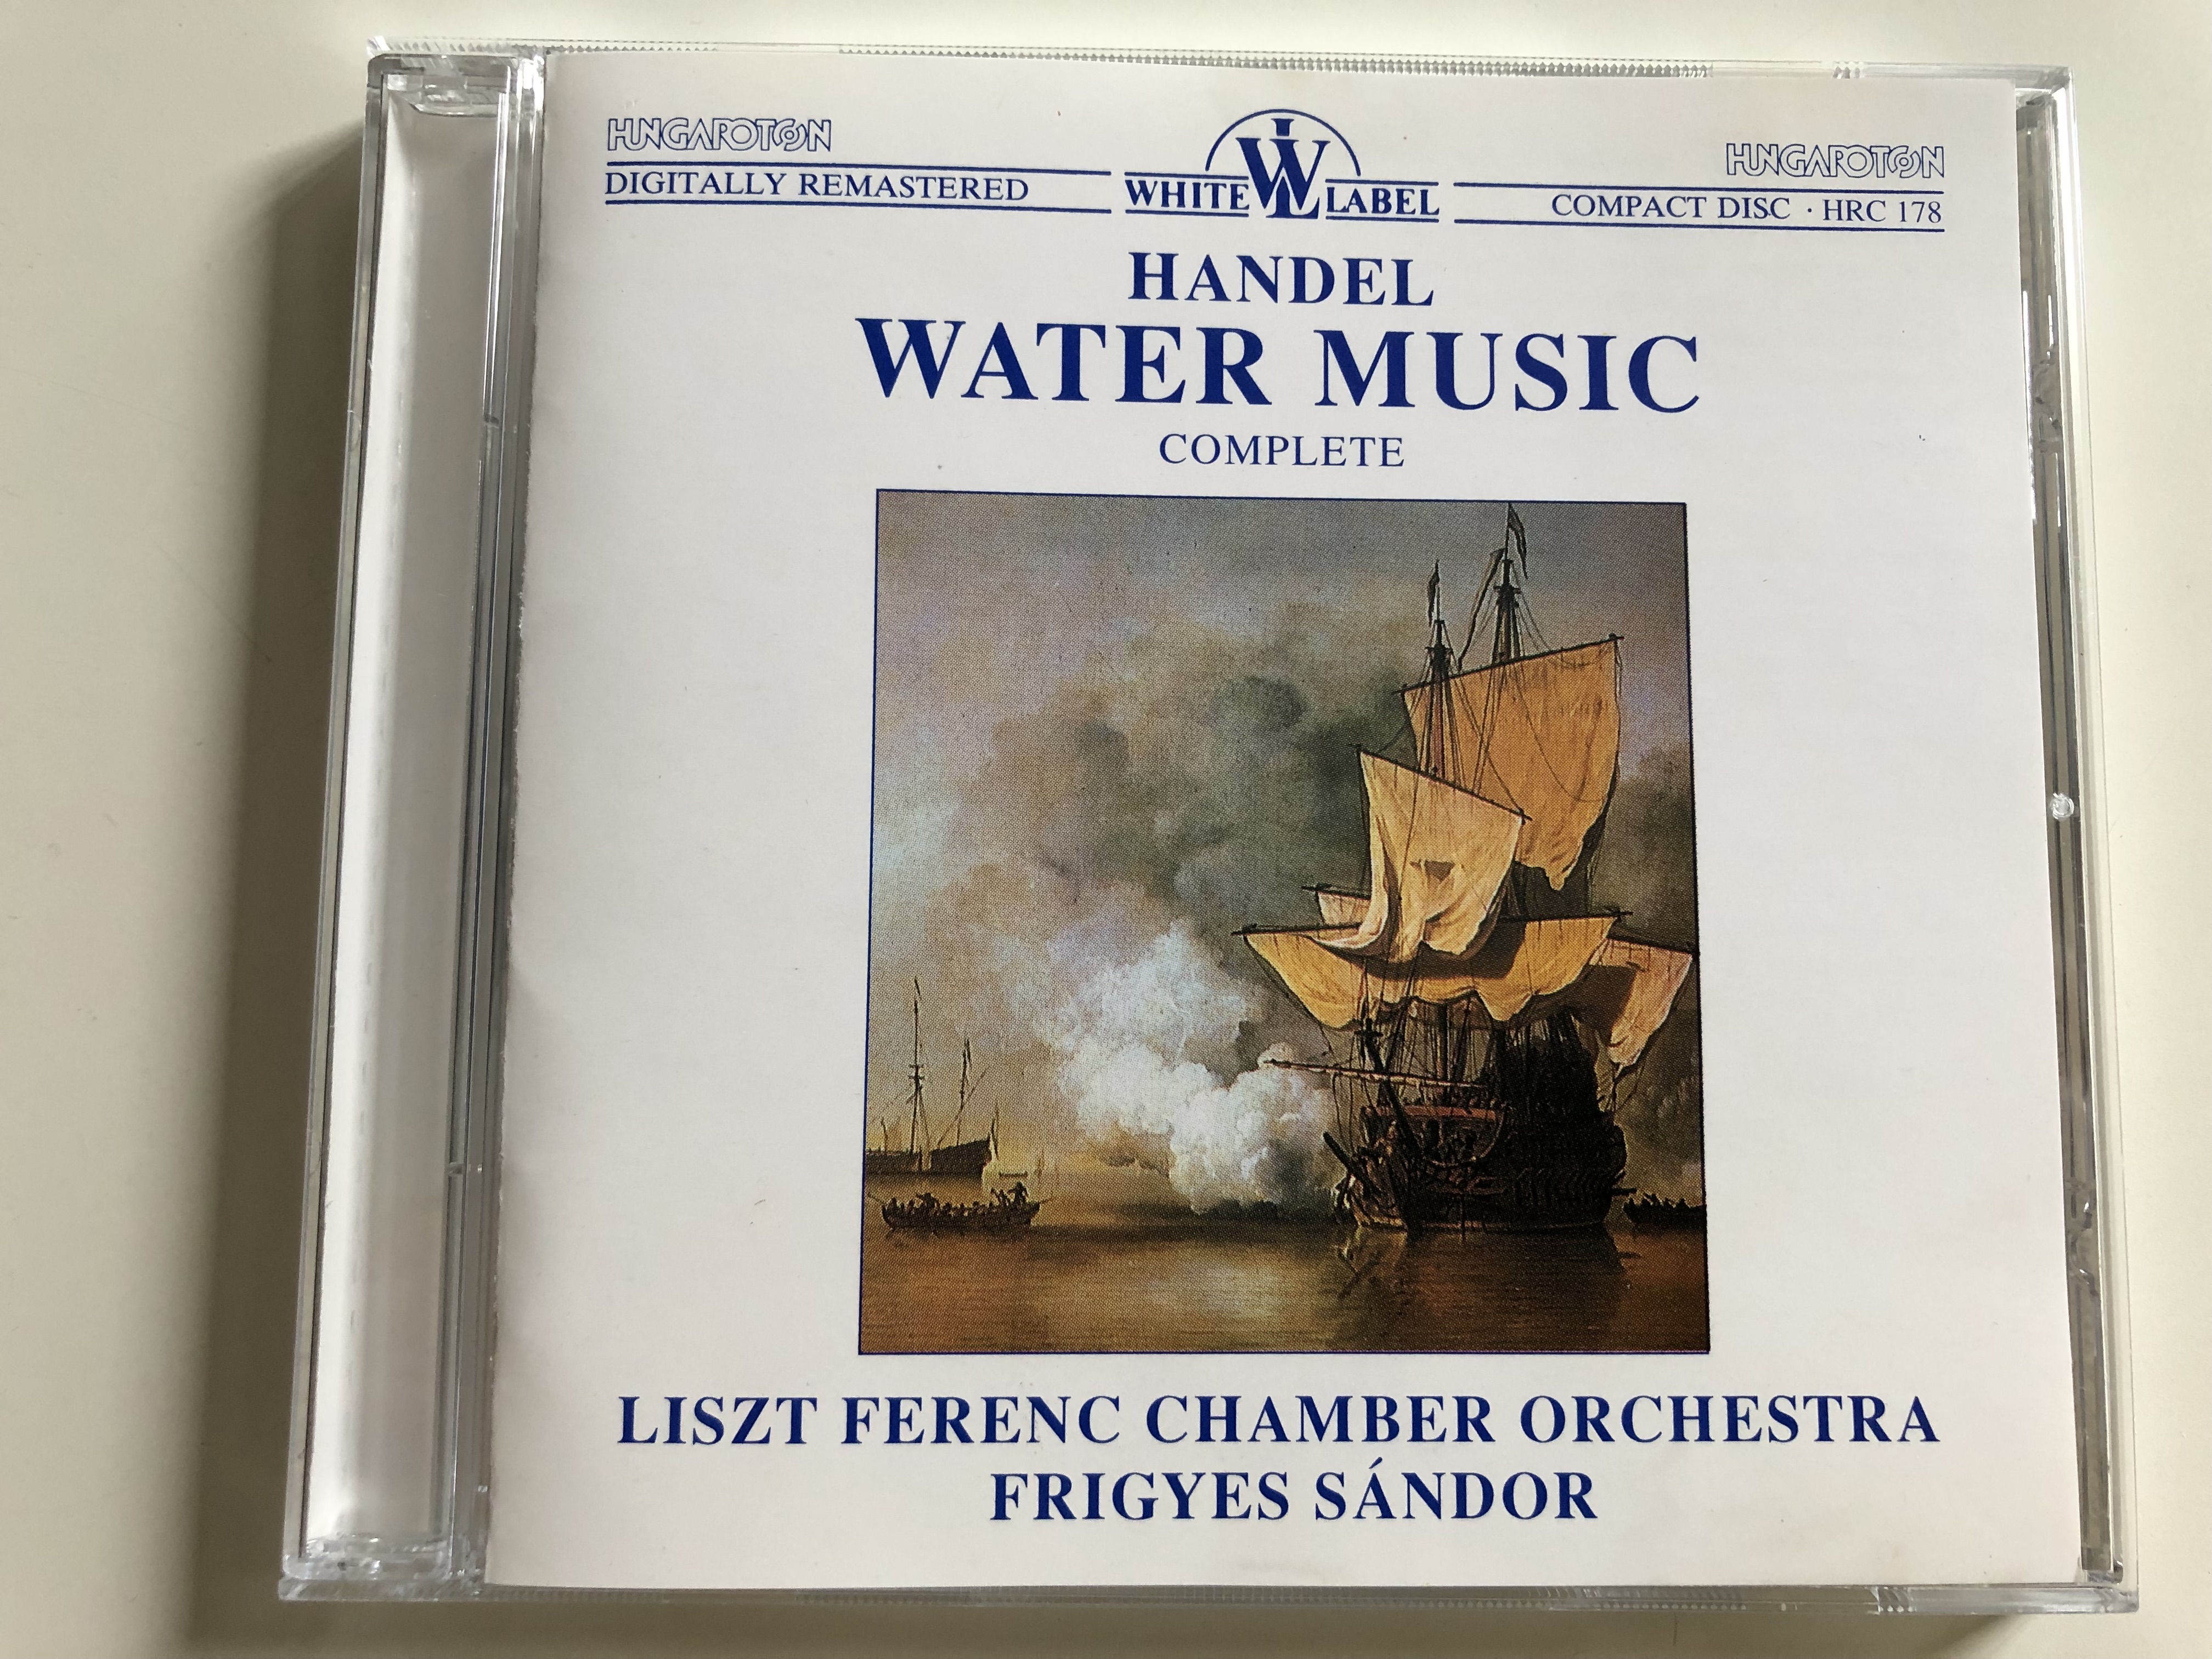 g.f.-handel-water-music-complete-liszt-ferenc-chamber-orchestra-conducted-by-frigyes-s-ndor-hungaroton-white-label-audio-cd-1991-hrc-178-1-.jpg